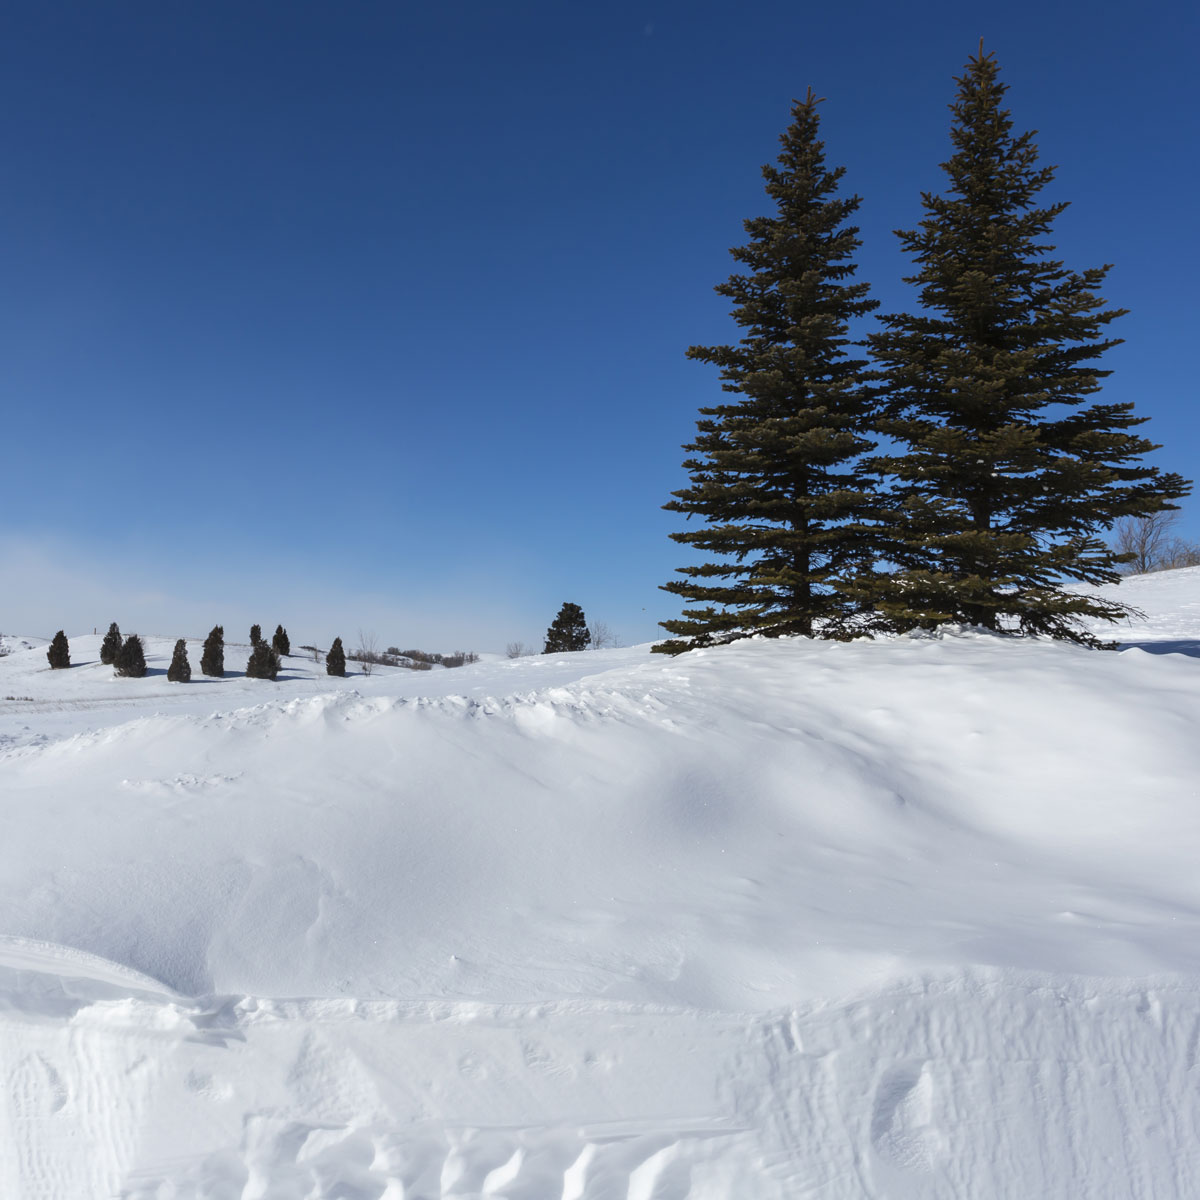 Two green pines stand contrasted against a blue winter sky surrounded by drifts of snow at Sunset Park in Mandan, North Dakota.